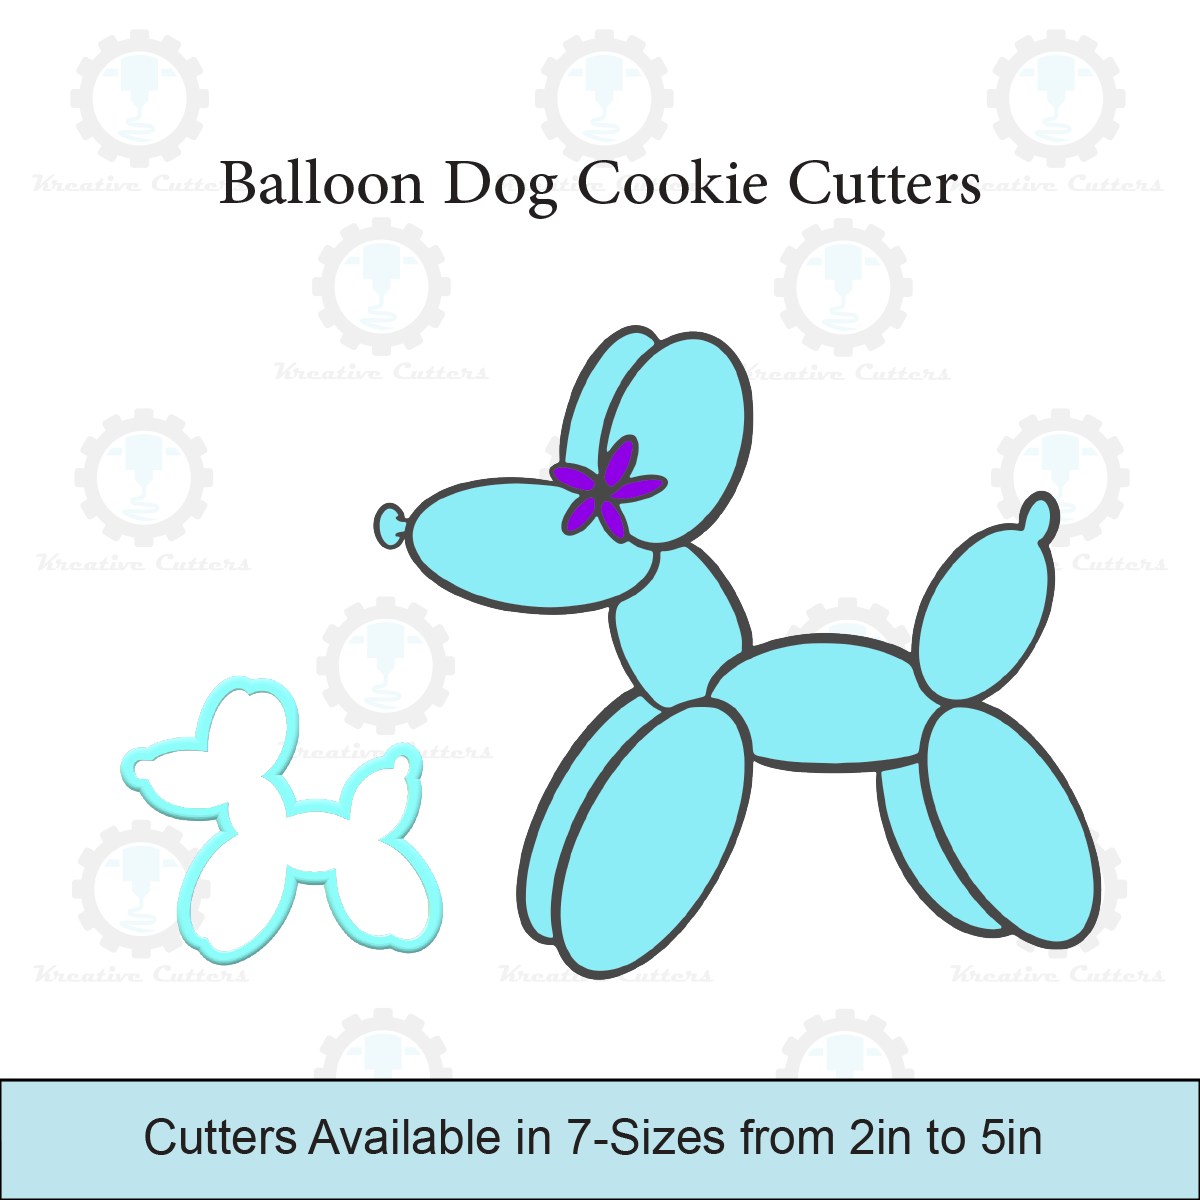 Balloon Dog Cookie Cutters